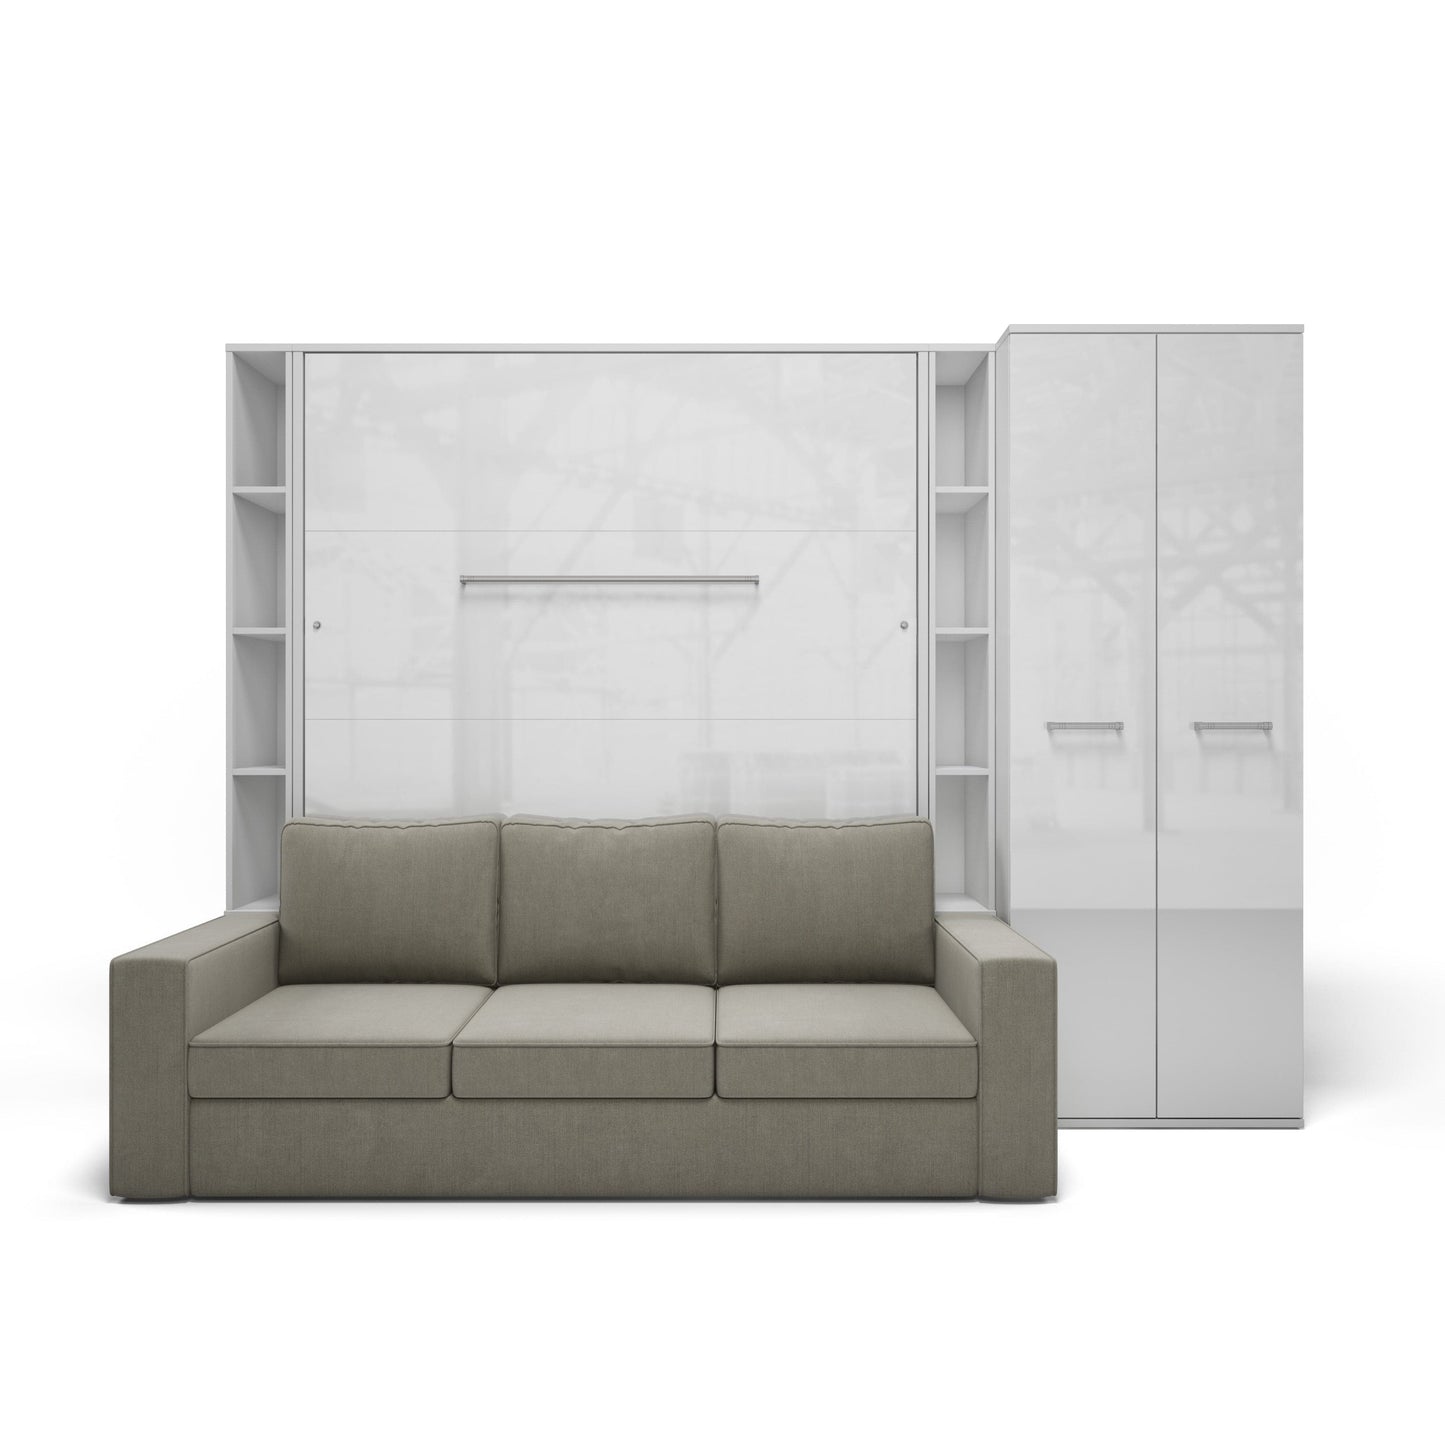 Maxima House Maxima House Vertical Queen size Murphy Bed Invento with a Sofa, two Cabinets and Wardrobe White/White + Beige IN014/23/24W-B